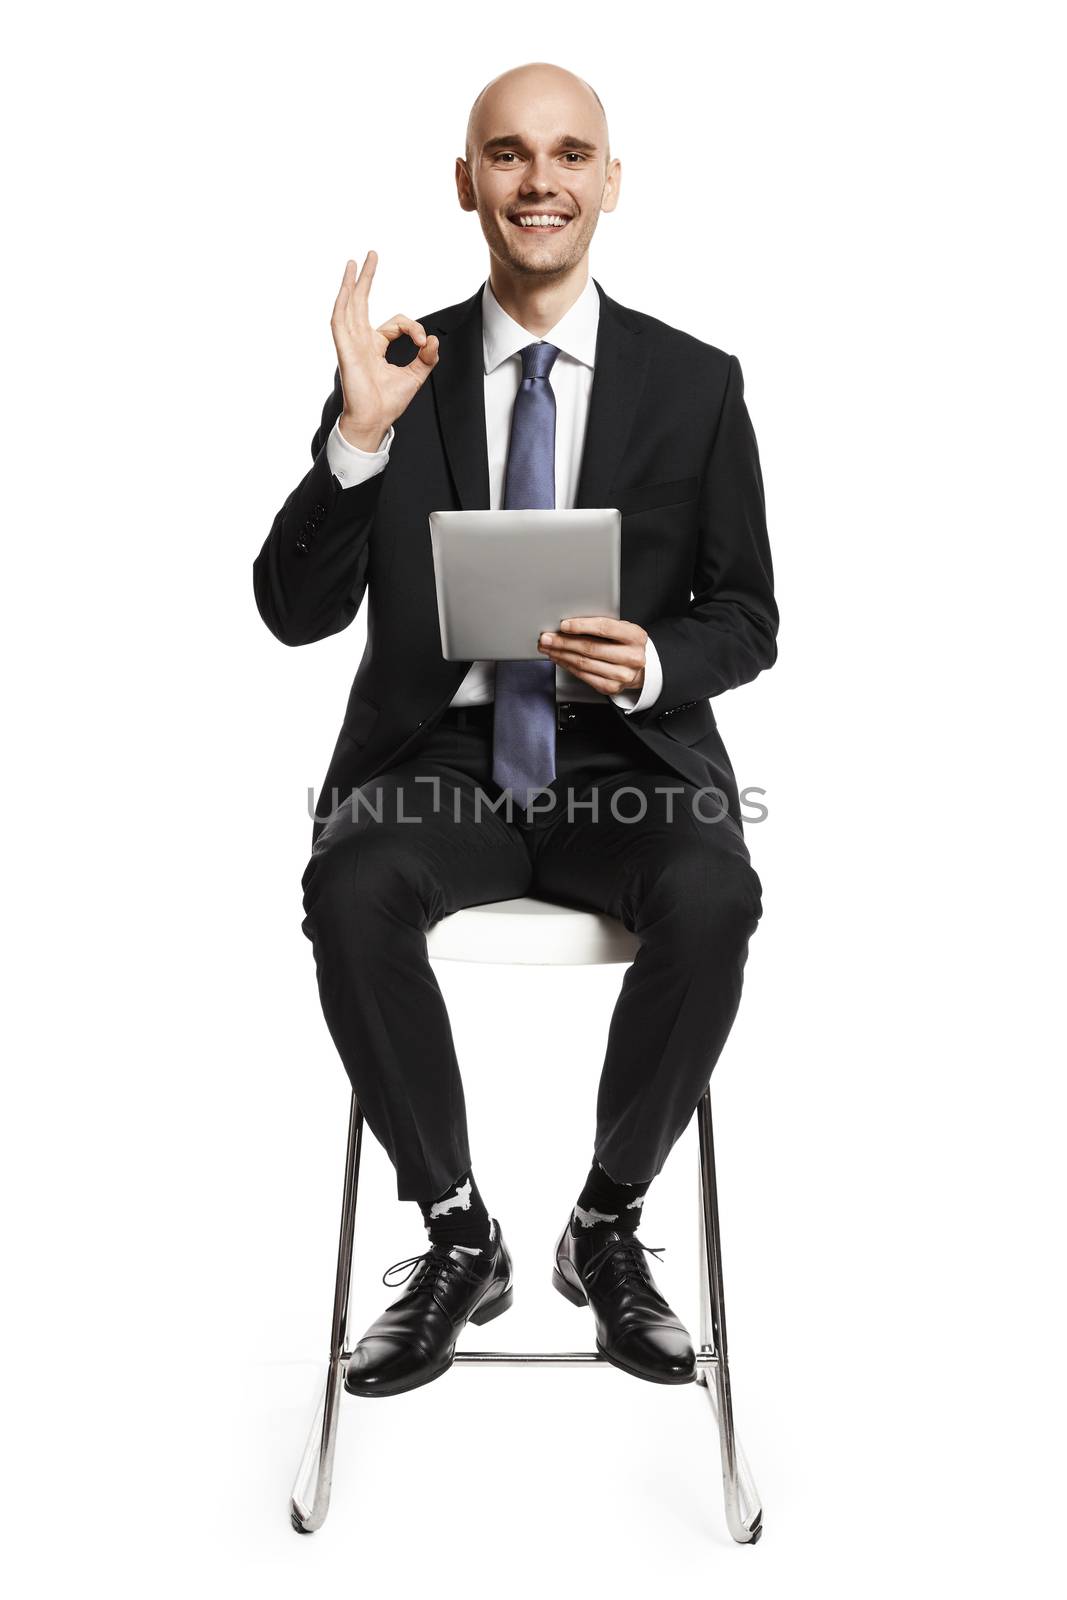 Cheerful young man working on digital tablet. Studio portrait isolated on white background.